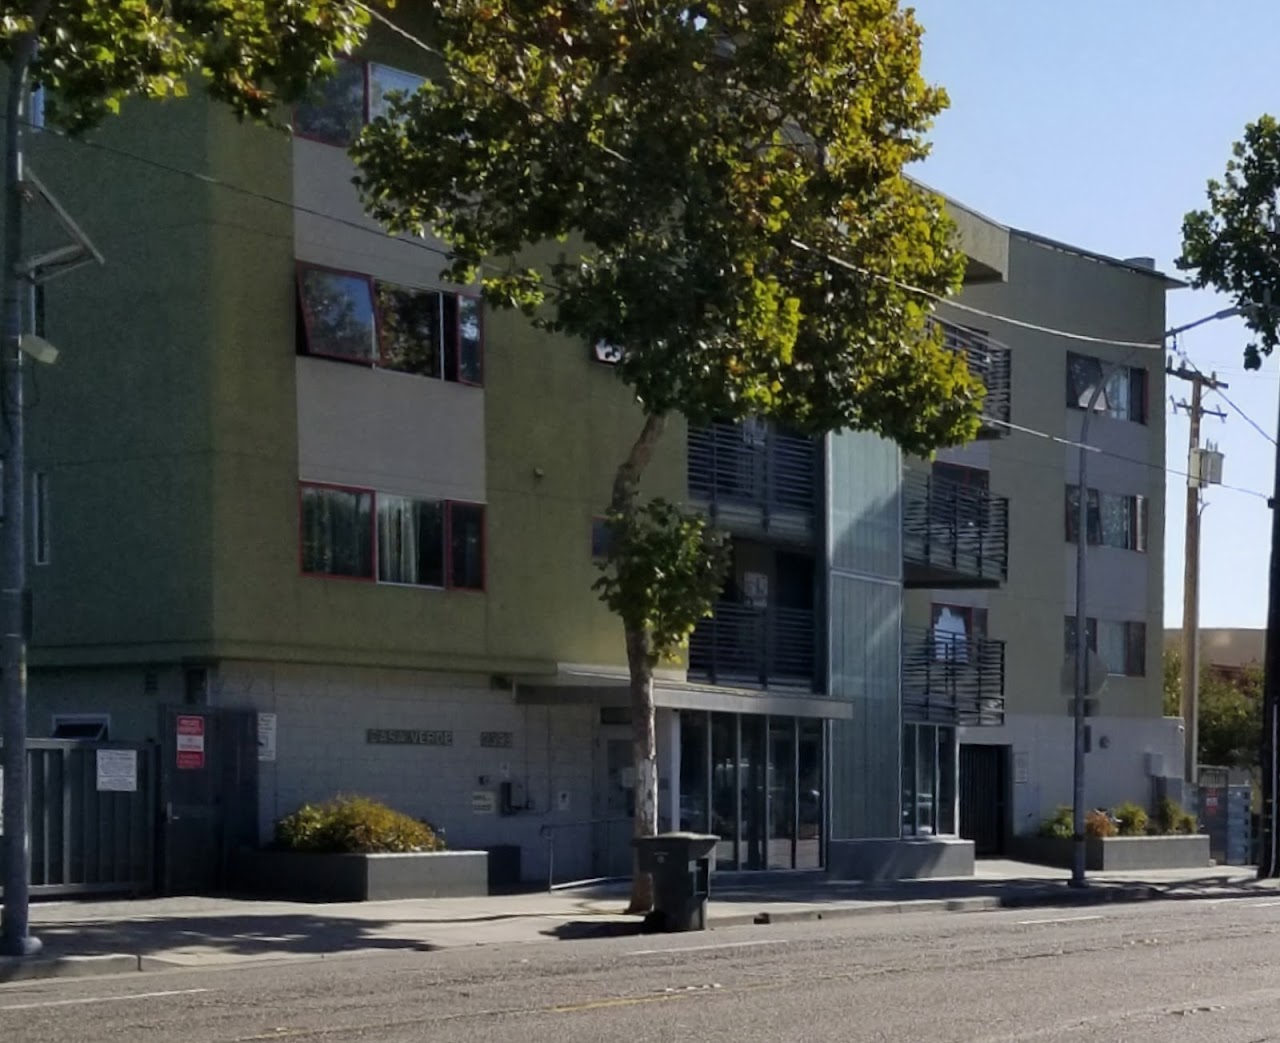 Photo of CASA VERDE. Affordable housing located at 2398 E 14TH ST SAN LEANDRO, CA 94577